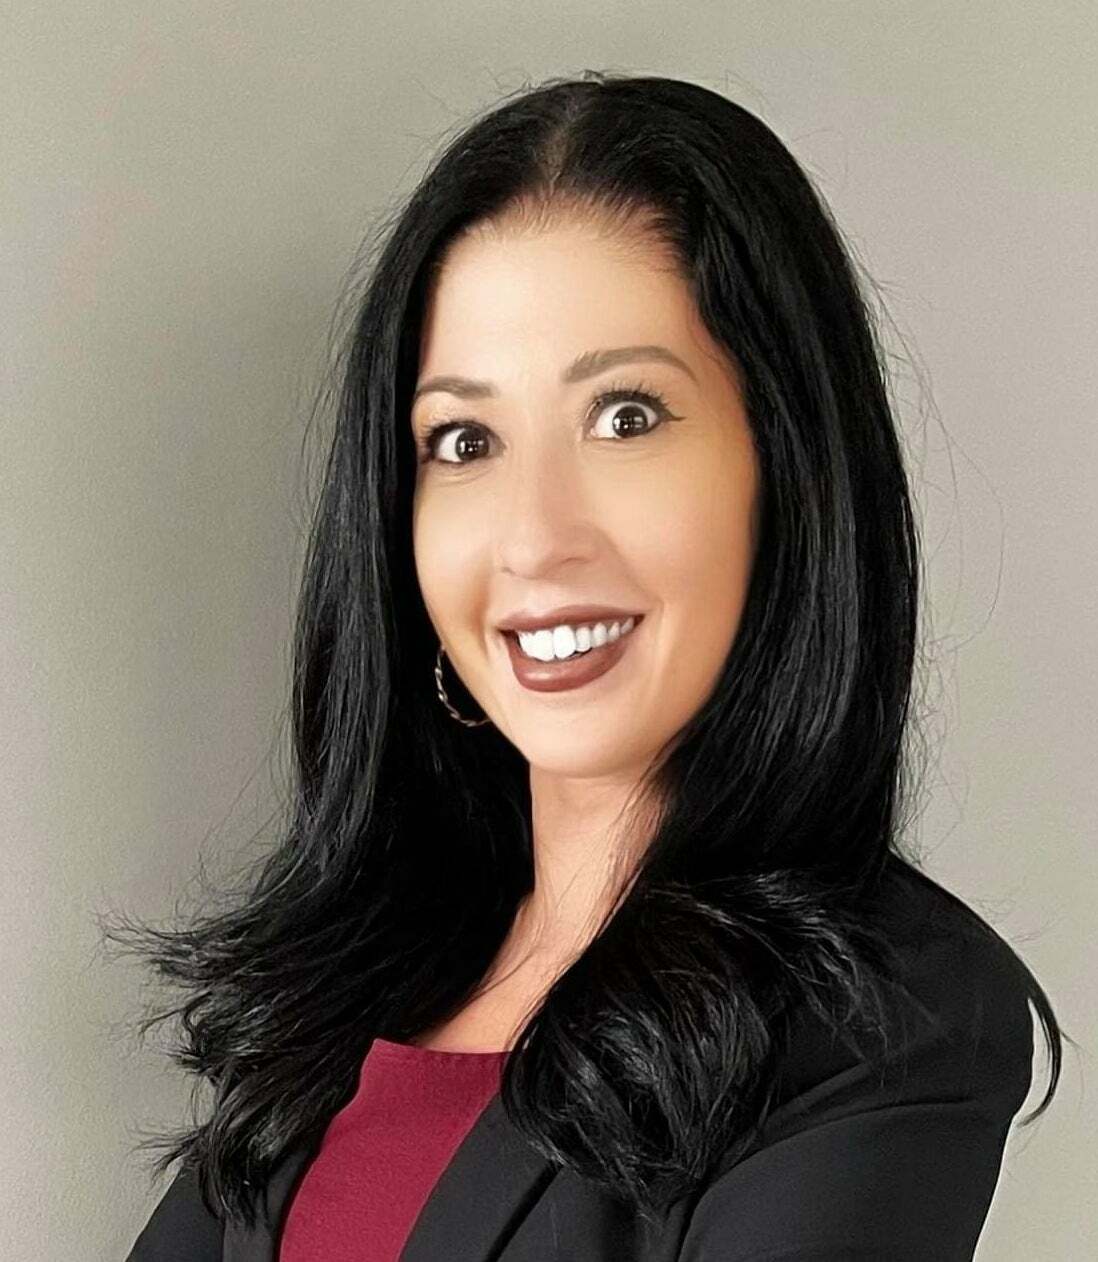 Kimberly Cacace, Associate Real Estate Broker in White Plains, ERA Insite Realty Services